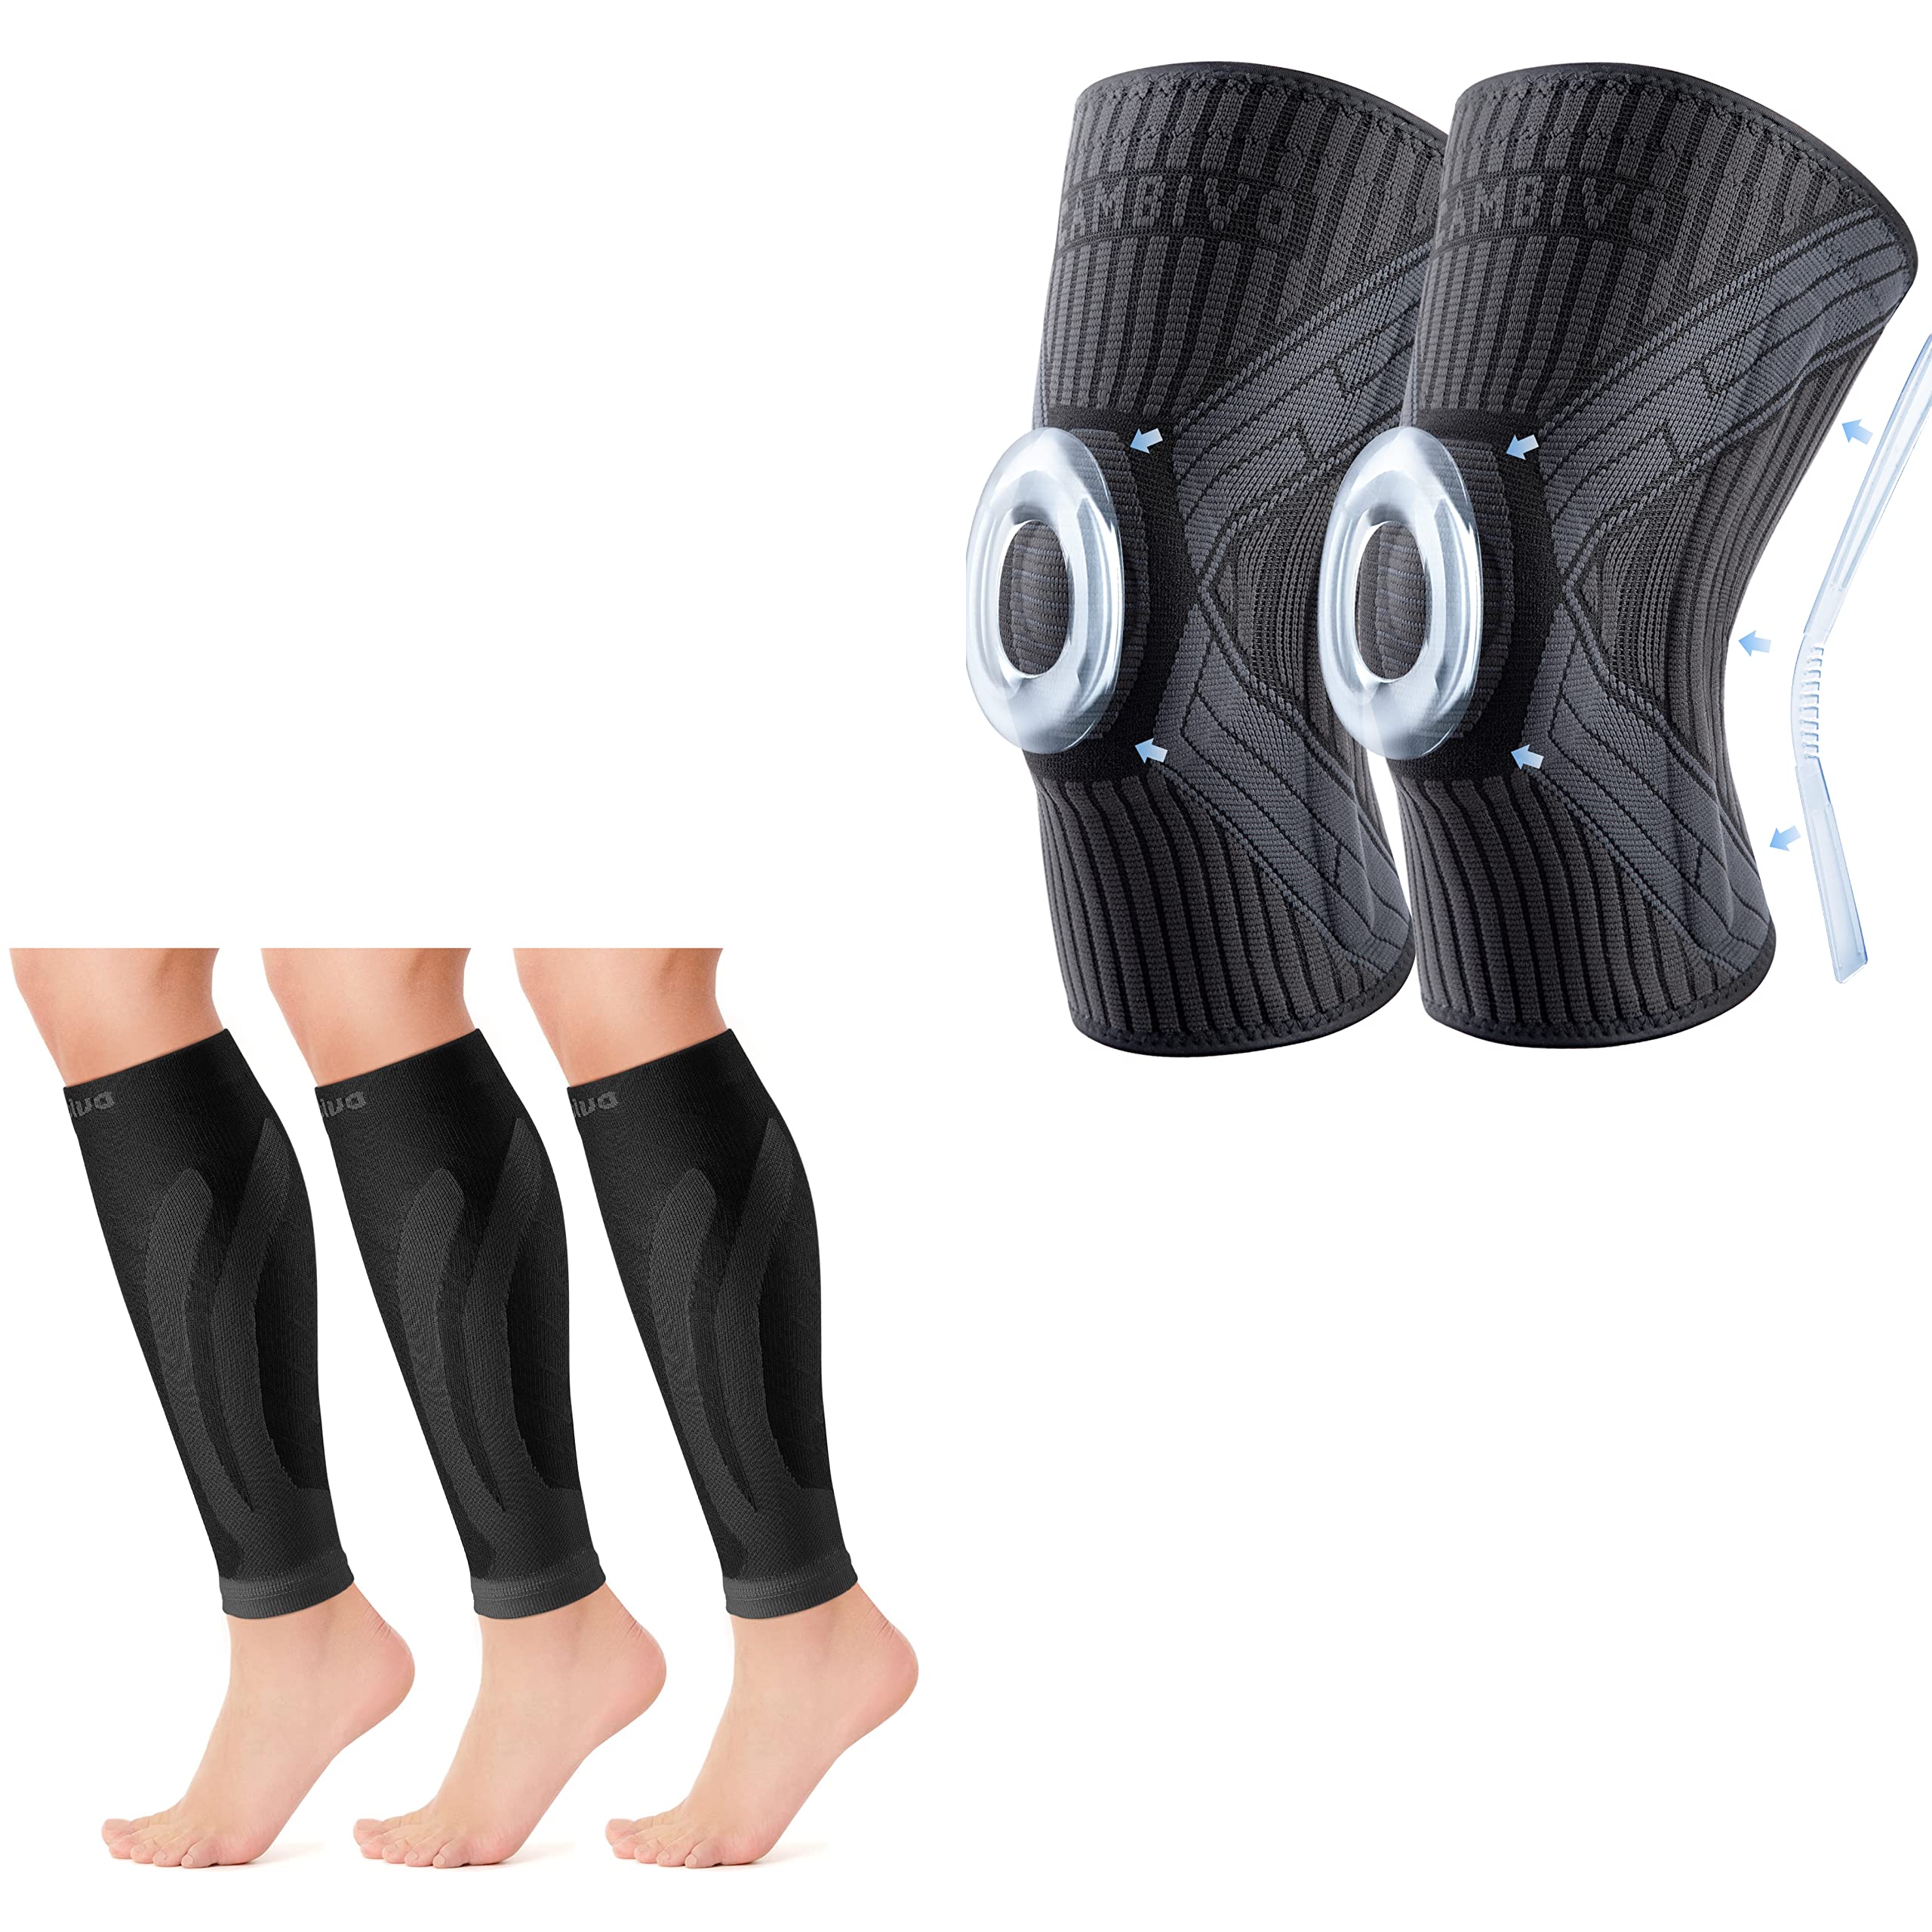 CAMBIVO 3 Pairs Calf Compression Sleeve bundled with 2 Pack Knee